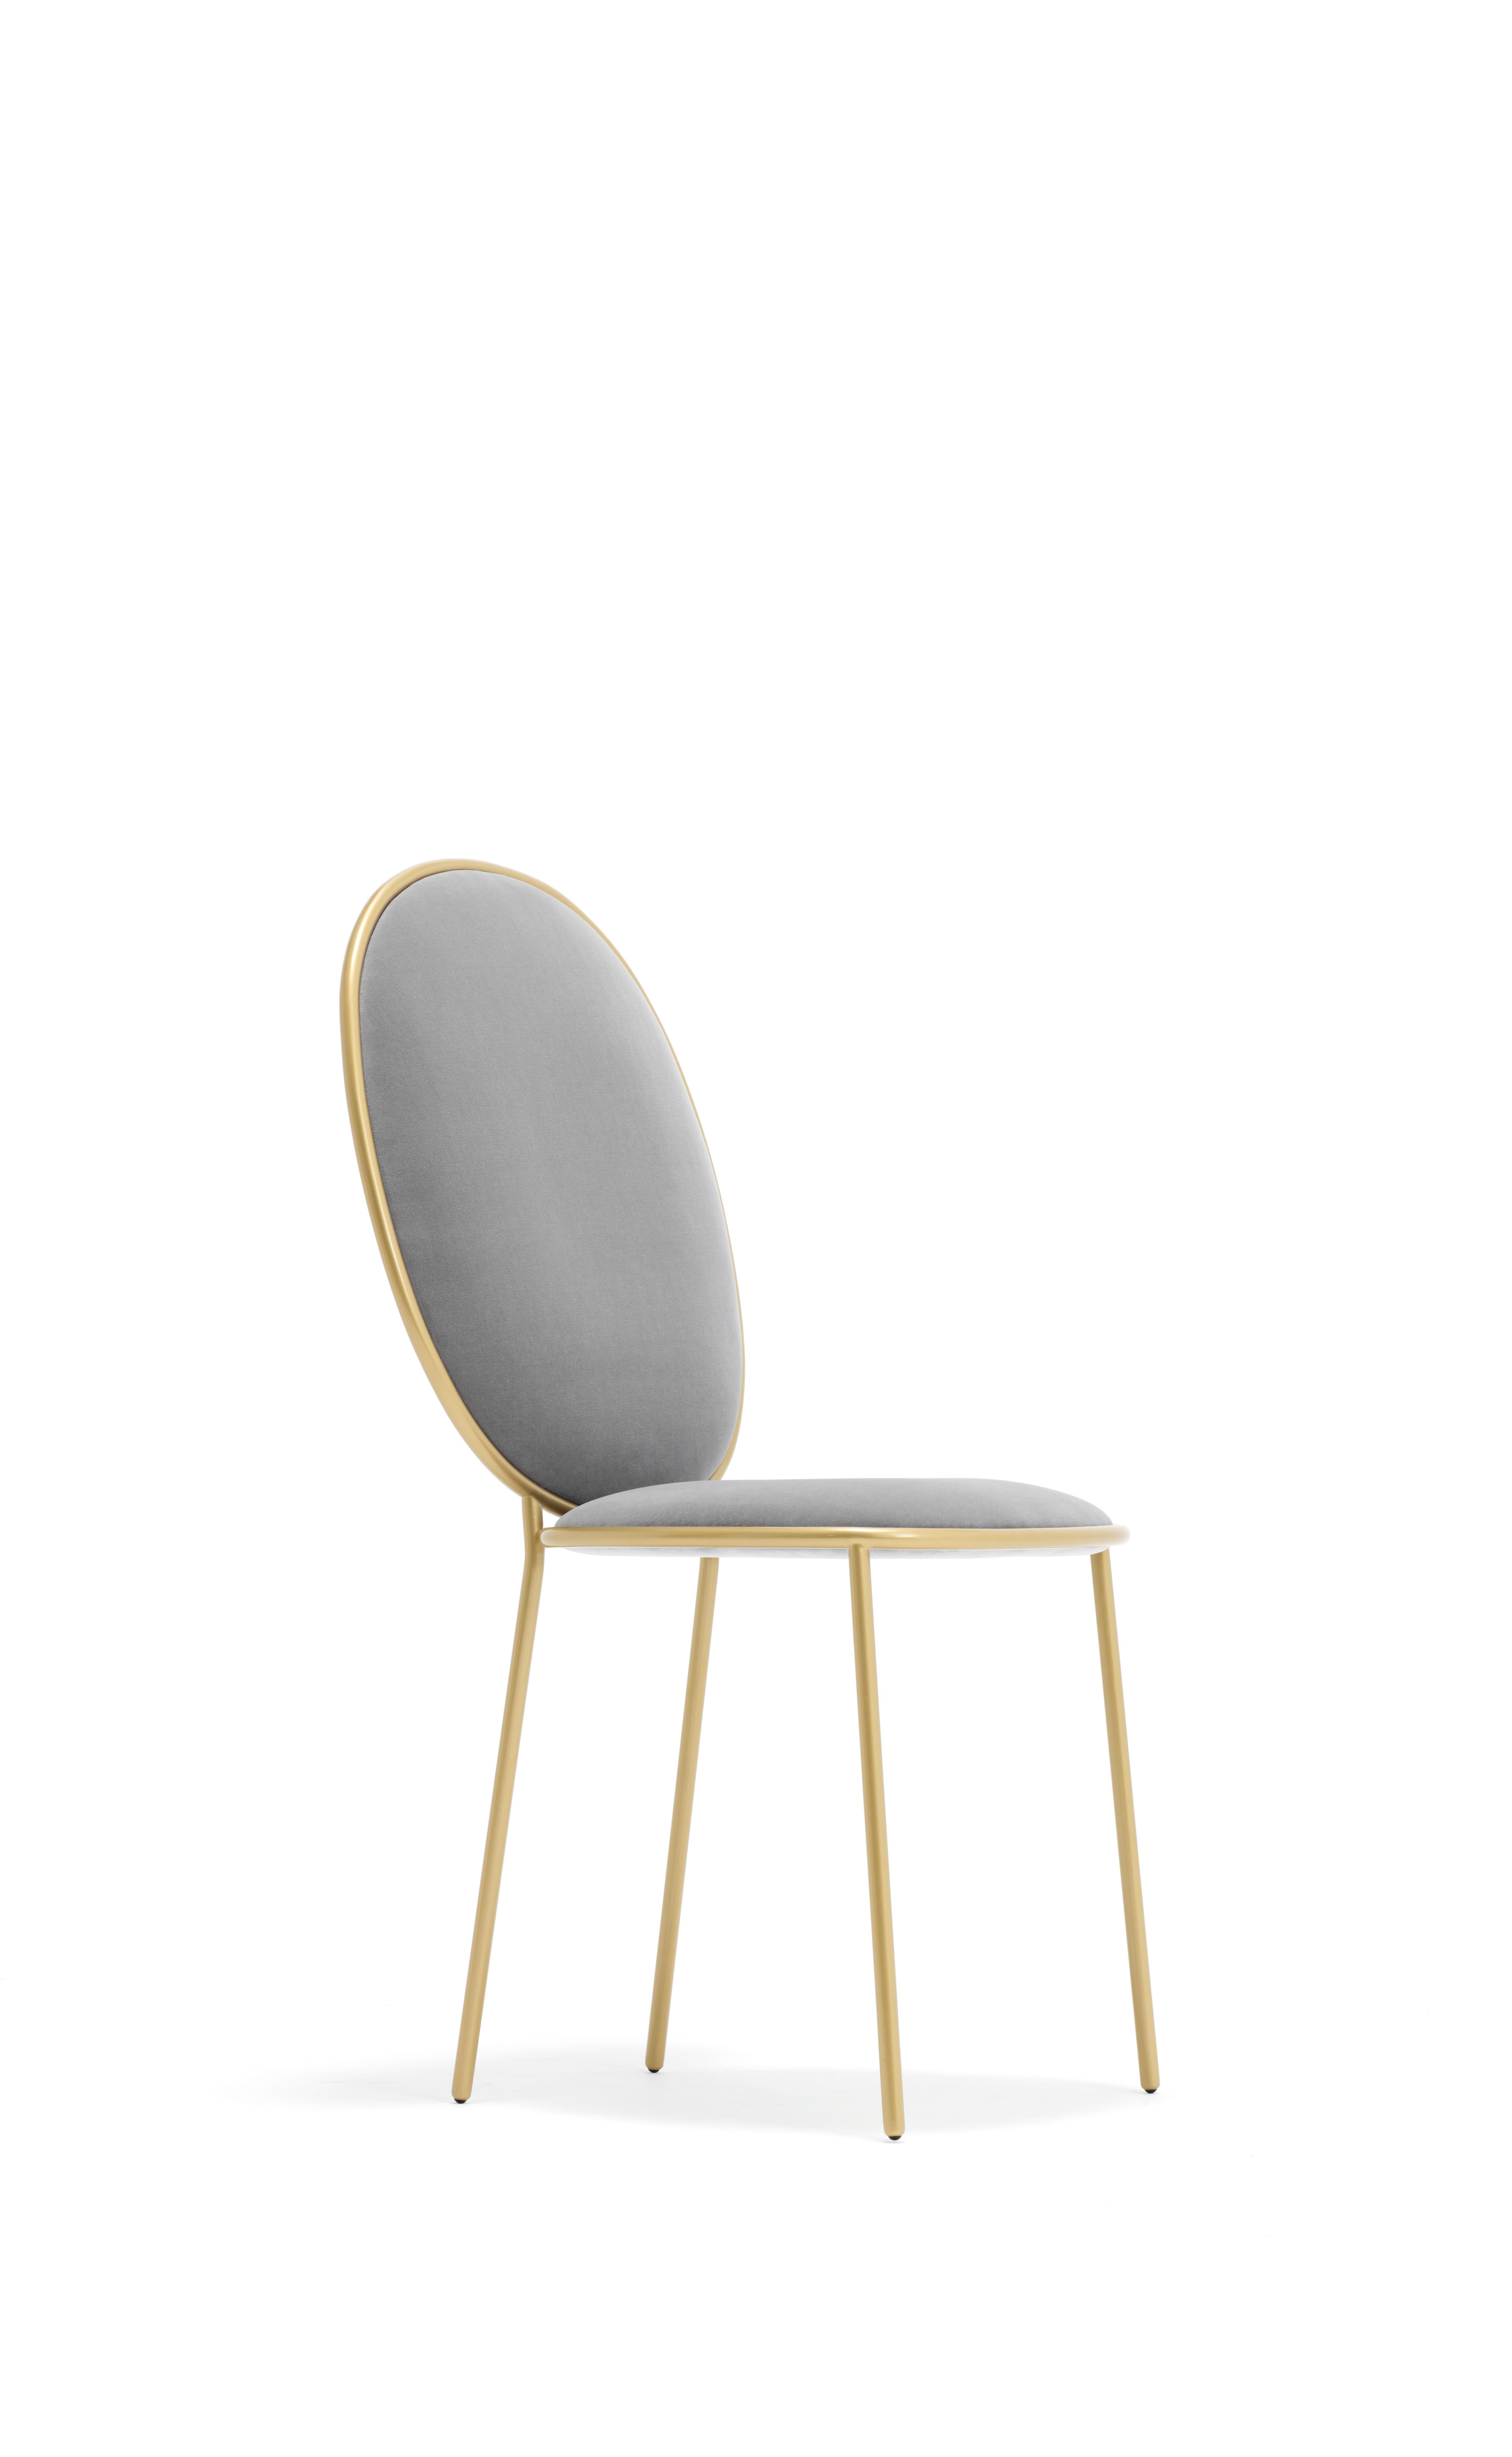 Contemporary Argent Grey Velvet Upholstered Dining Chair - Stay by Nika Zupanc

The Stay Family turns everyday seating into a special occasion. The Dining Chair and Dining Armchair are variations on an elegant social theme whilst the Dining Table